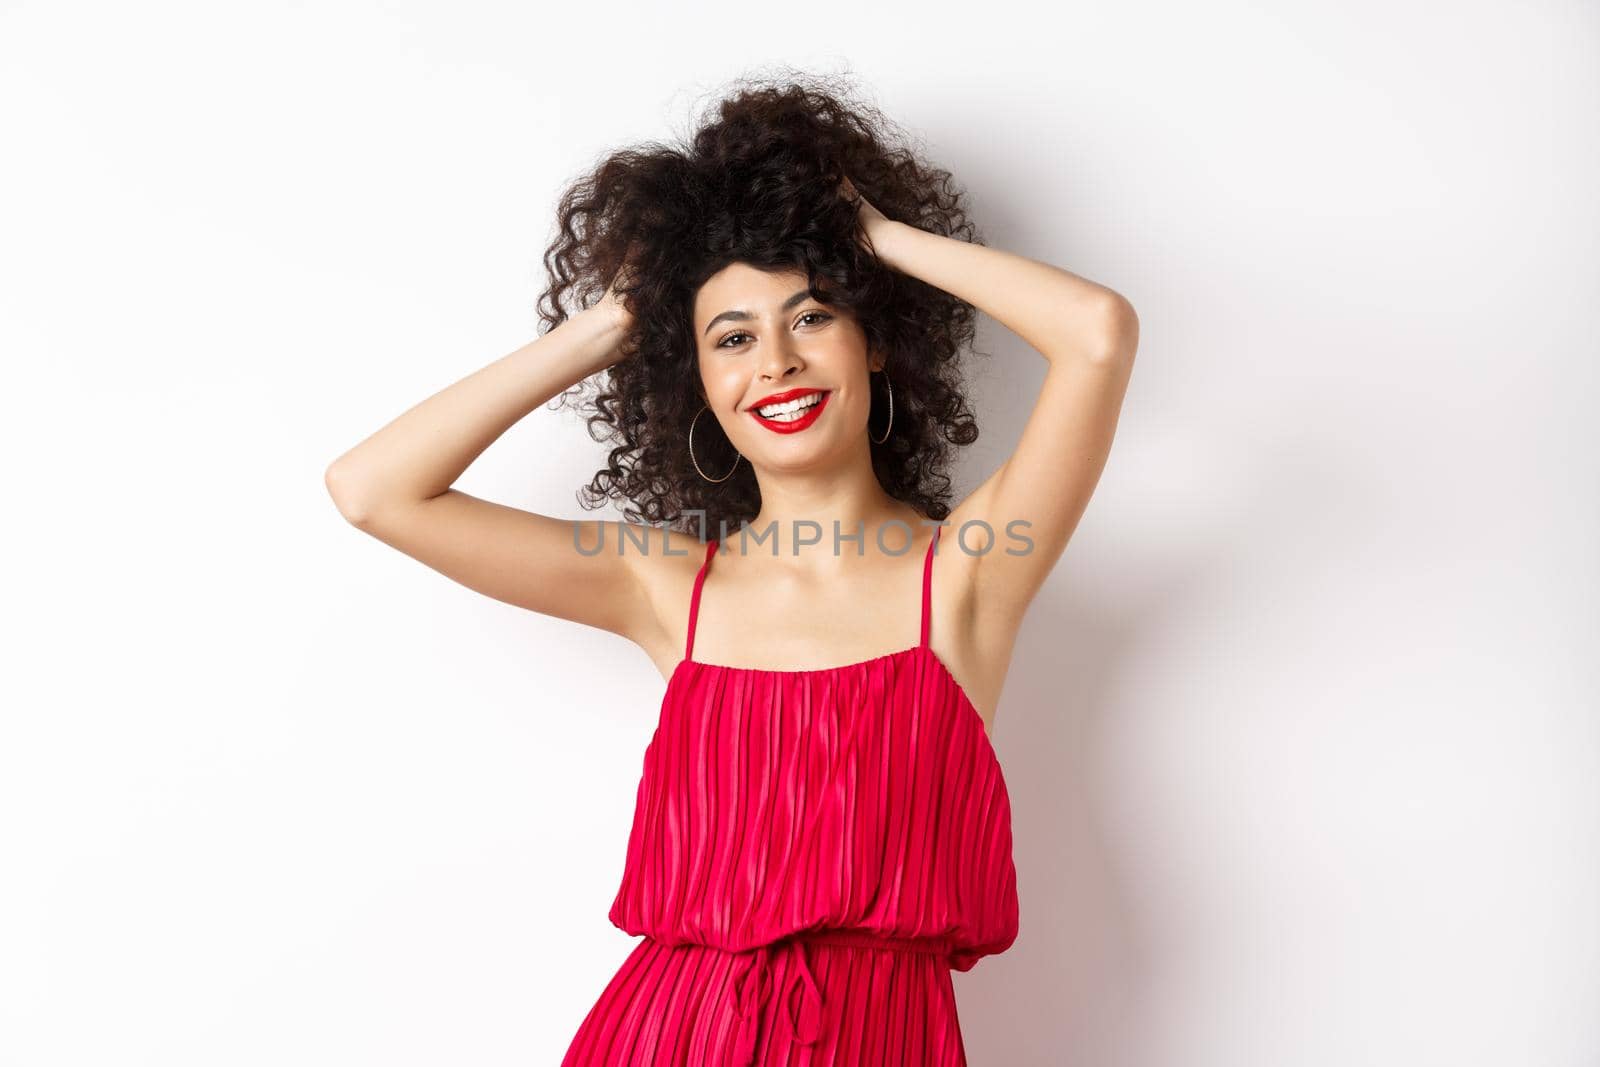 Happy smiling woman touching her curly hair and laughing, standing in red dress on white background.